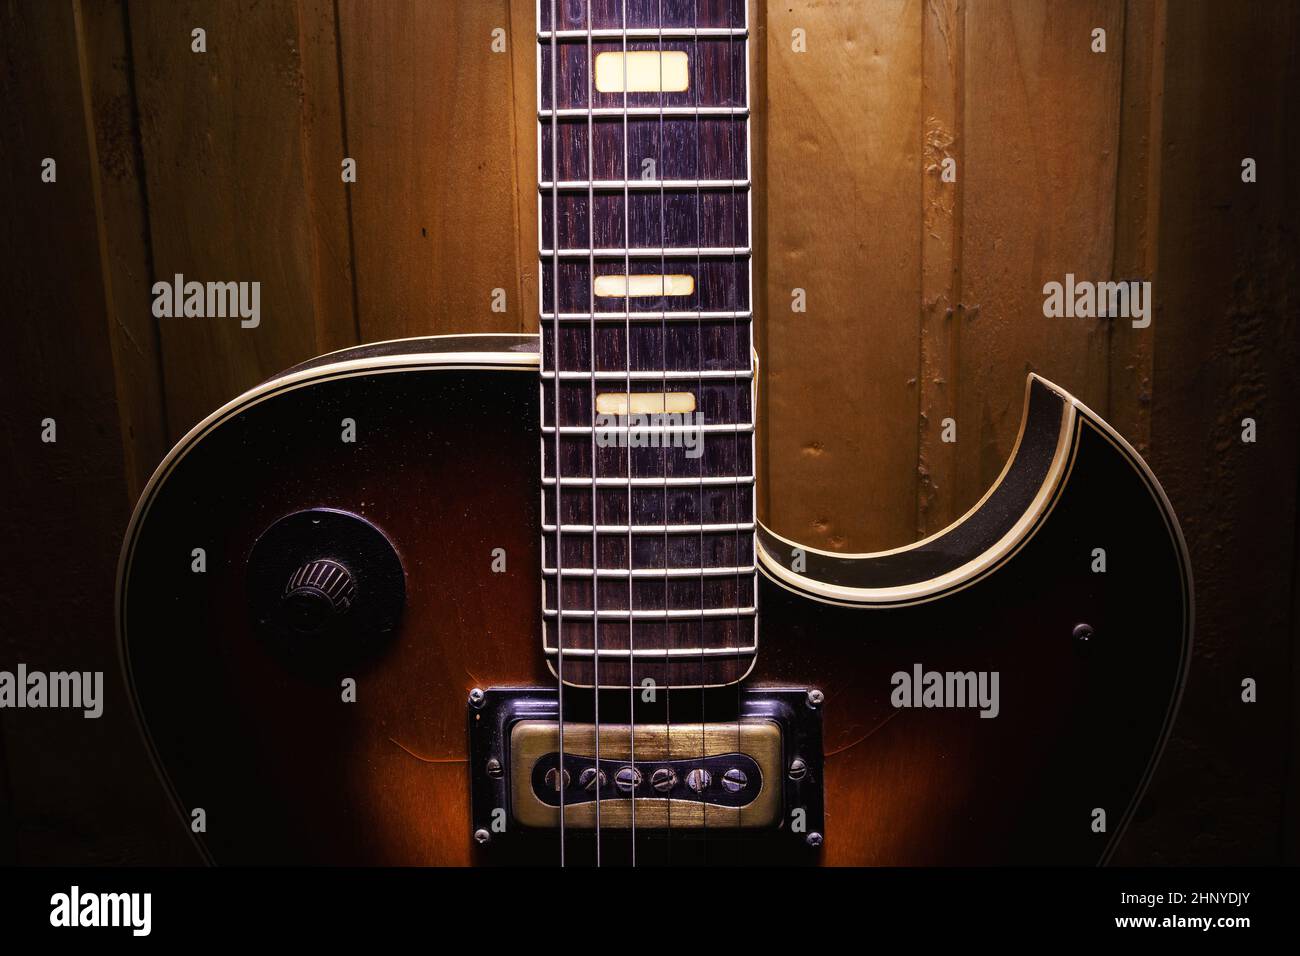 Beautiful old electric guitar on wall. Stock Photo